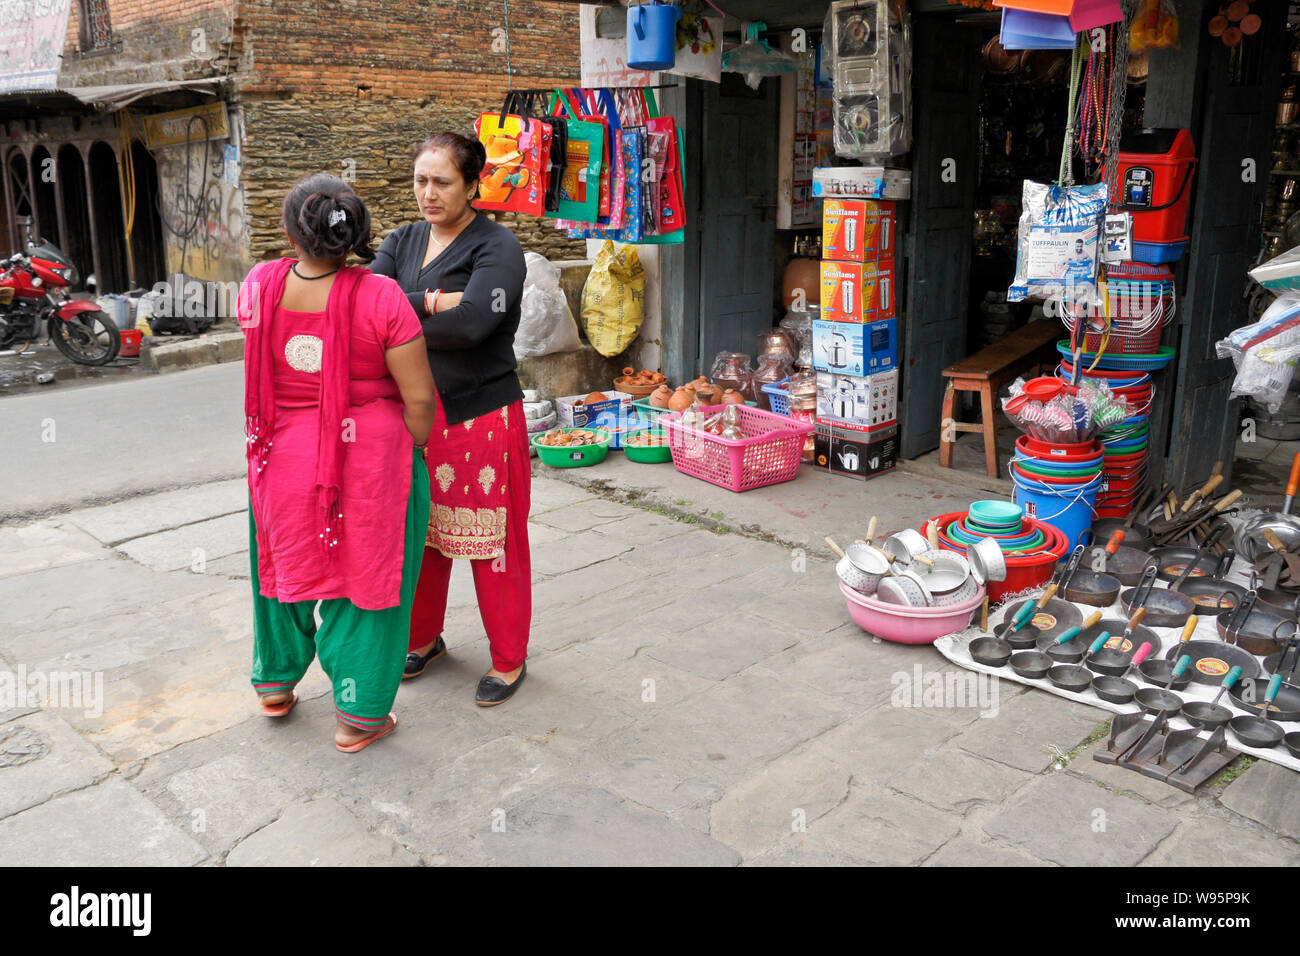 Women in traditional dress standing outside a shop in the Old Bazaar area of Pokhara, Nepal Stock Photo